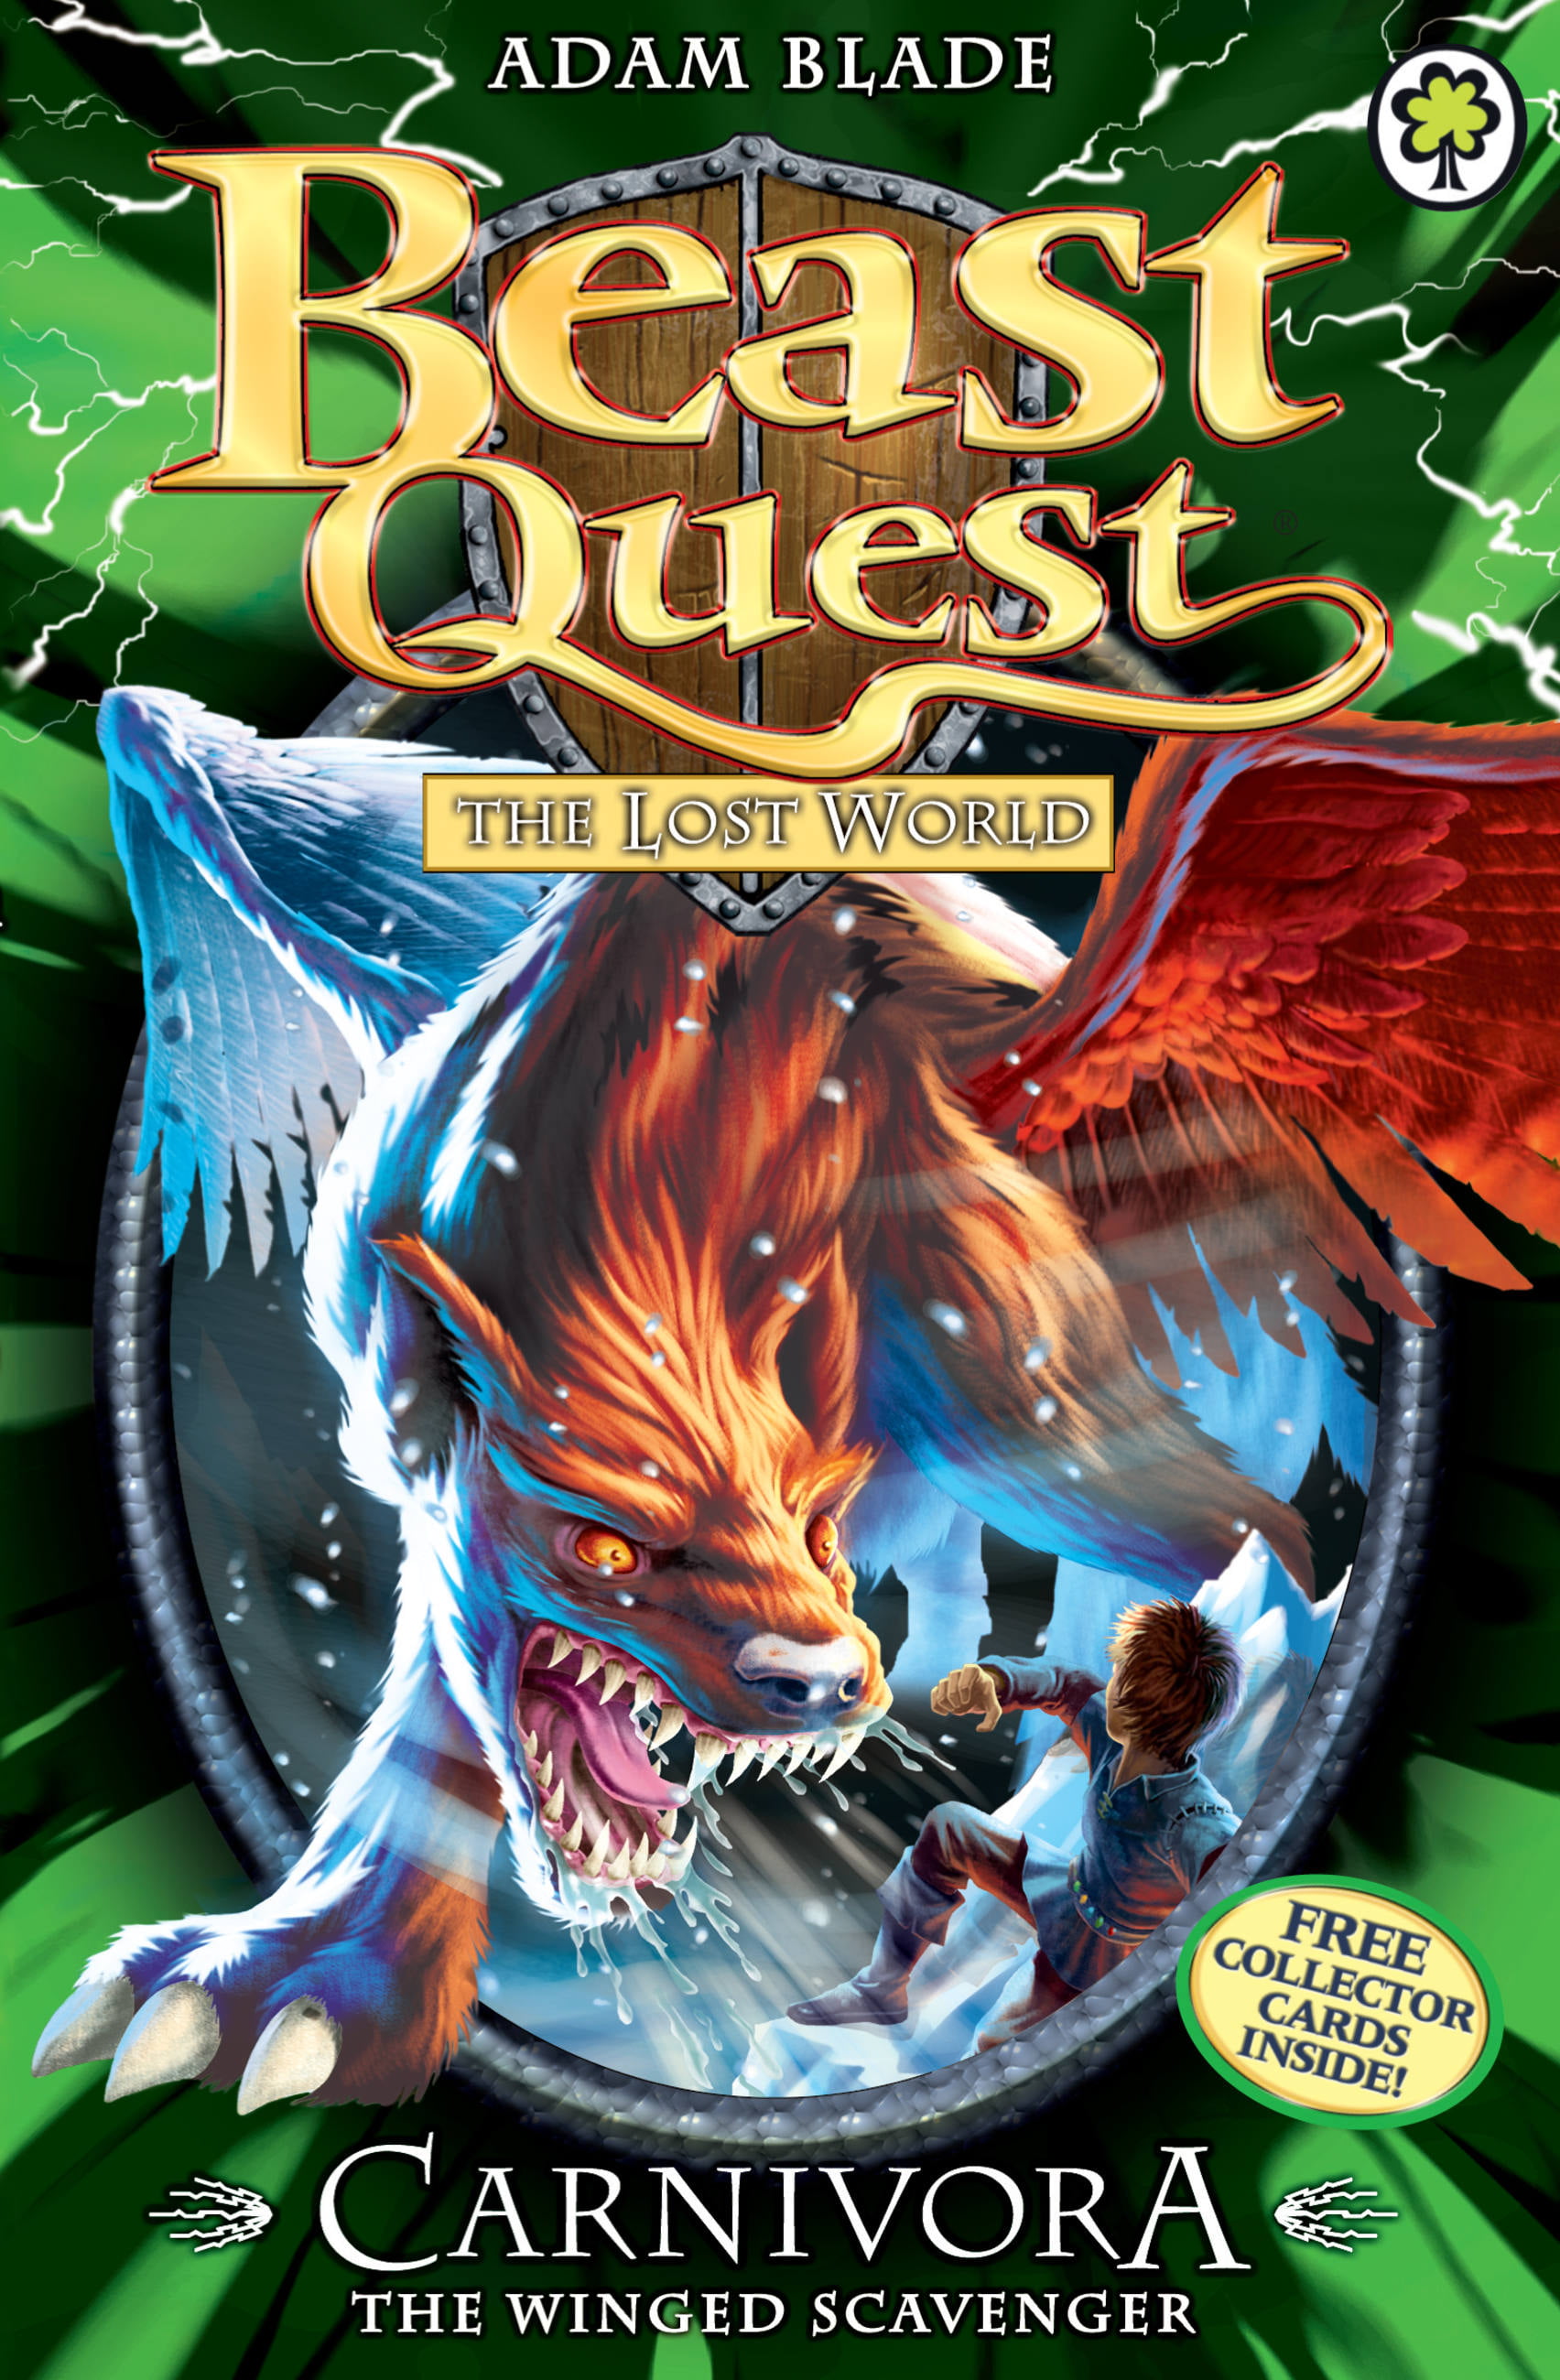 book review of beast quest